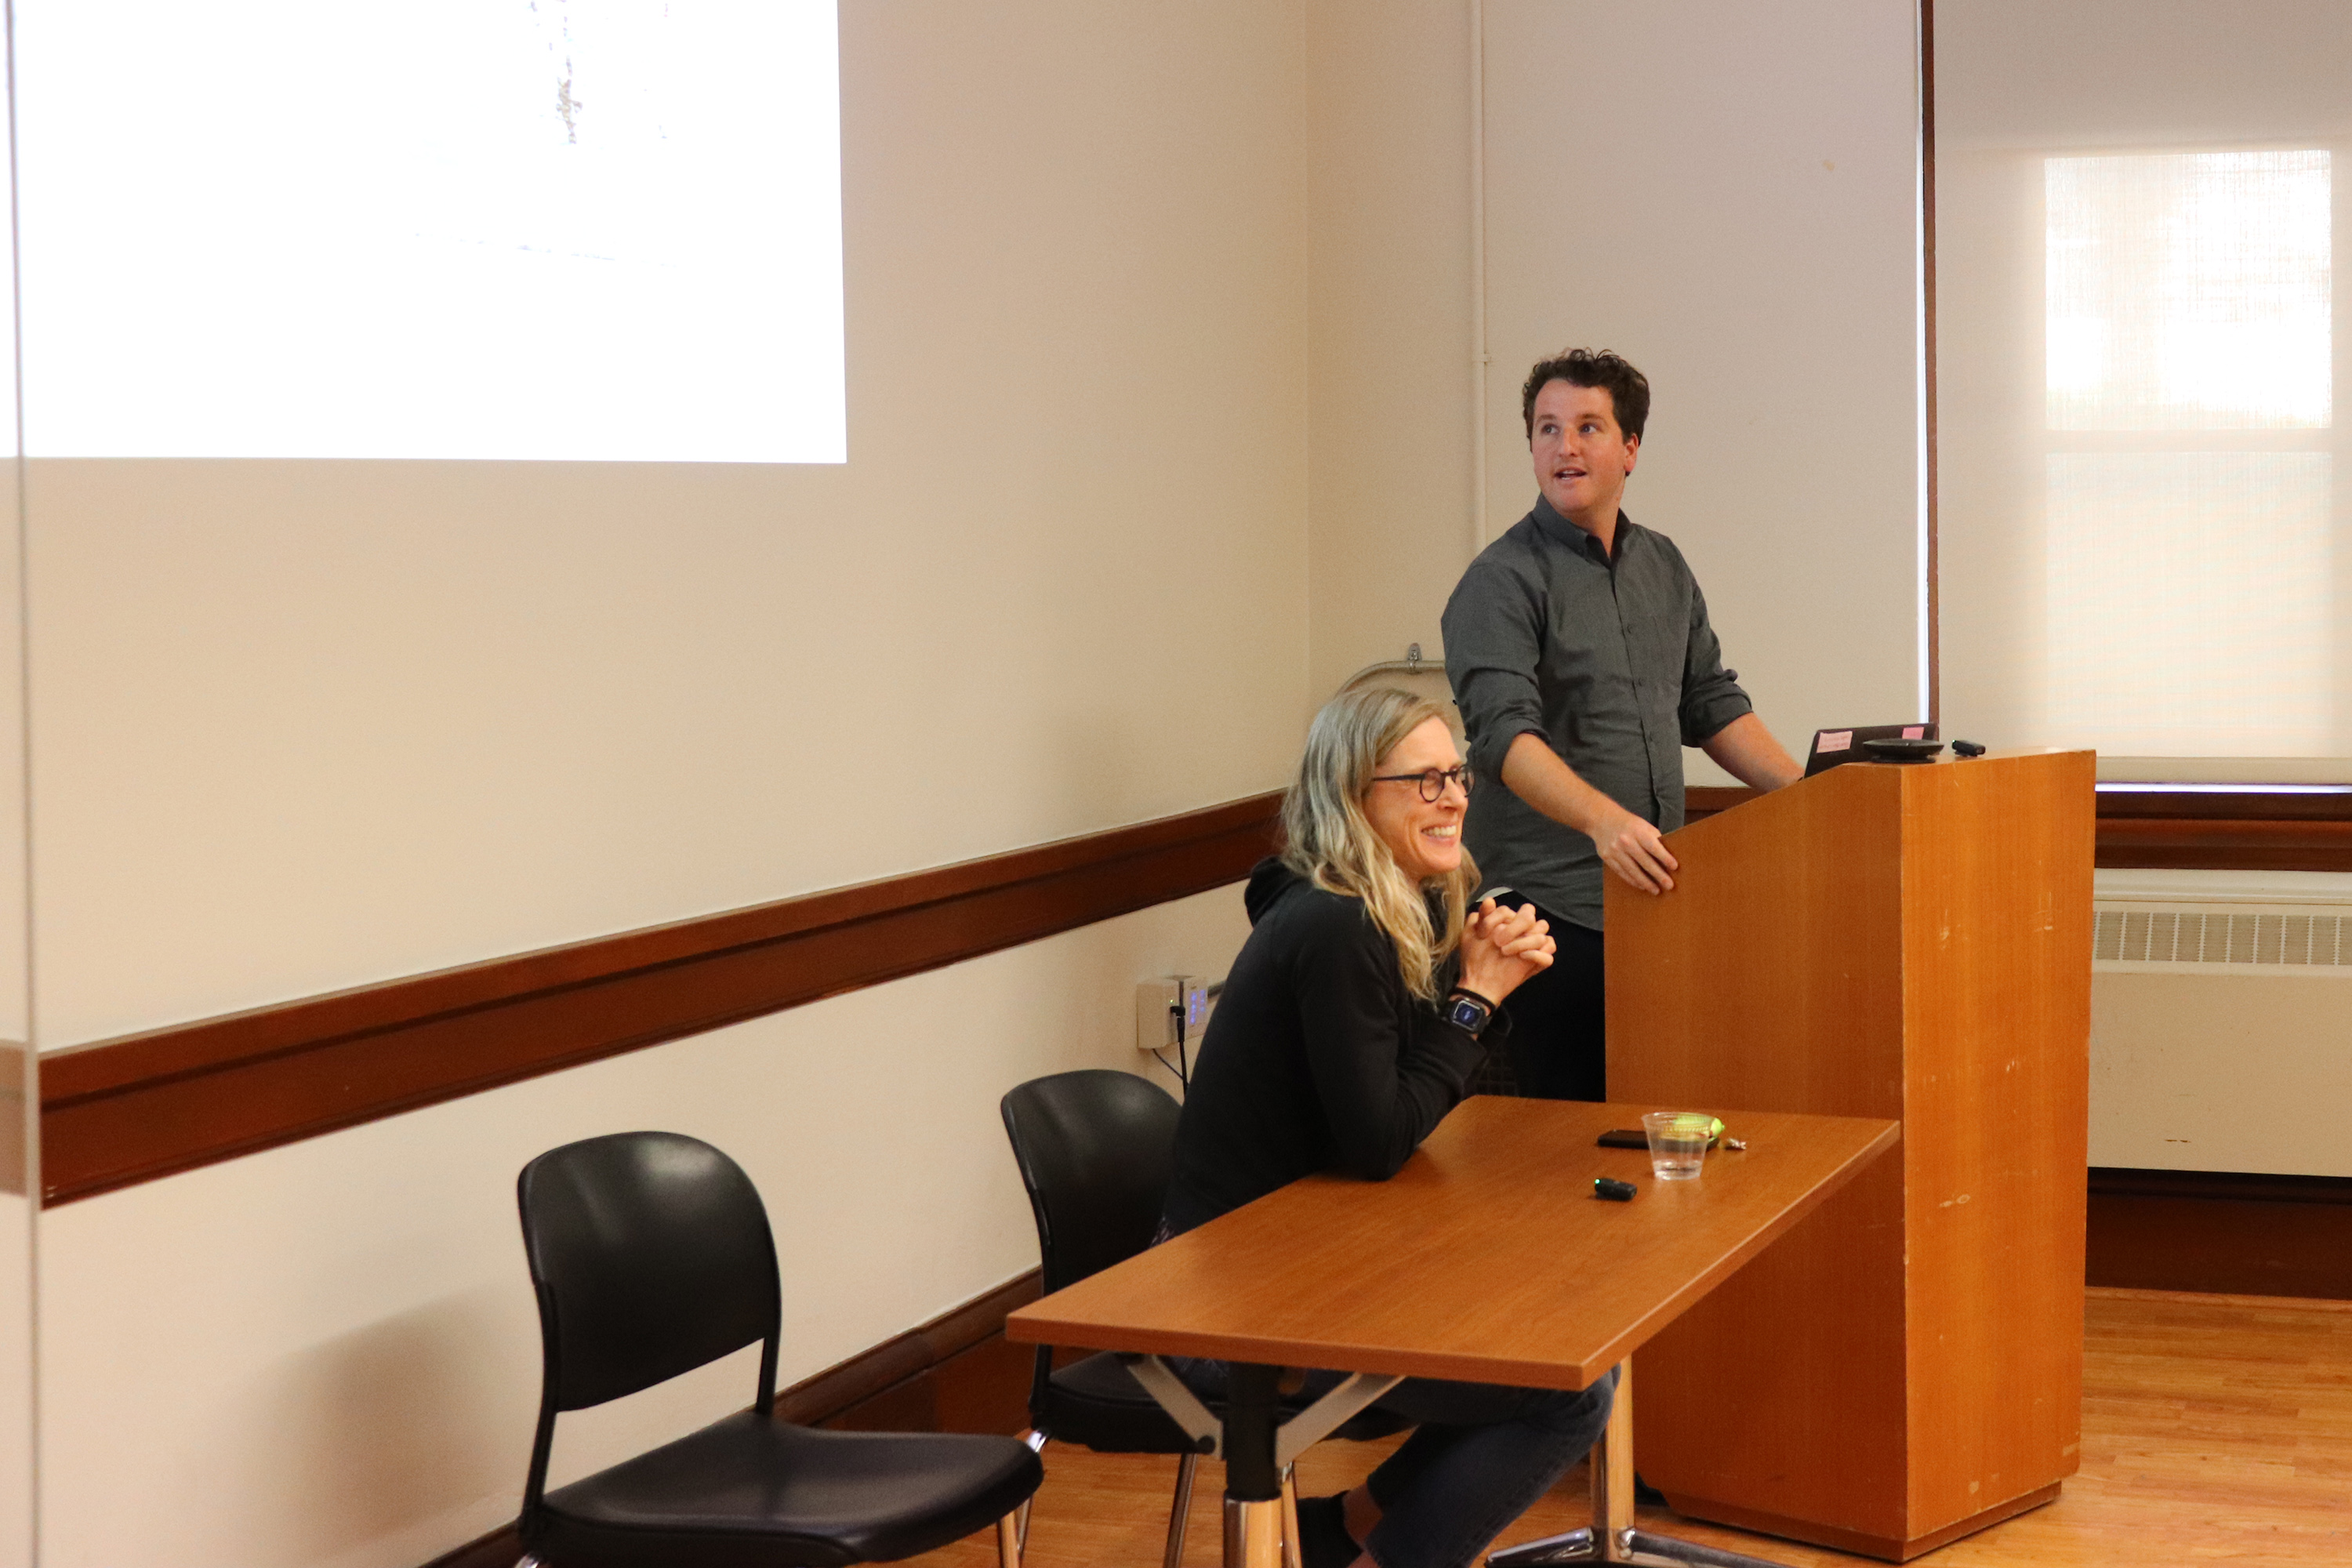 Caltrans CA Integrated Mobility Program Manager Gillian Gillett and Research Data Manager Hunter Owens presented Crossing Modes: Bringing Data, Standardization and Performance Metrics to Transit Agencies & Caltrans at the ITS Seminar on March 3, 2023.